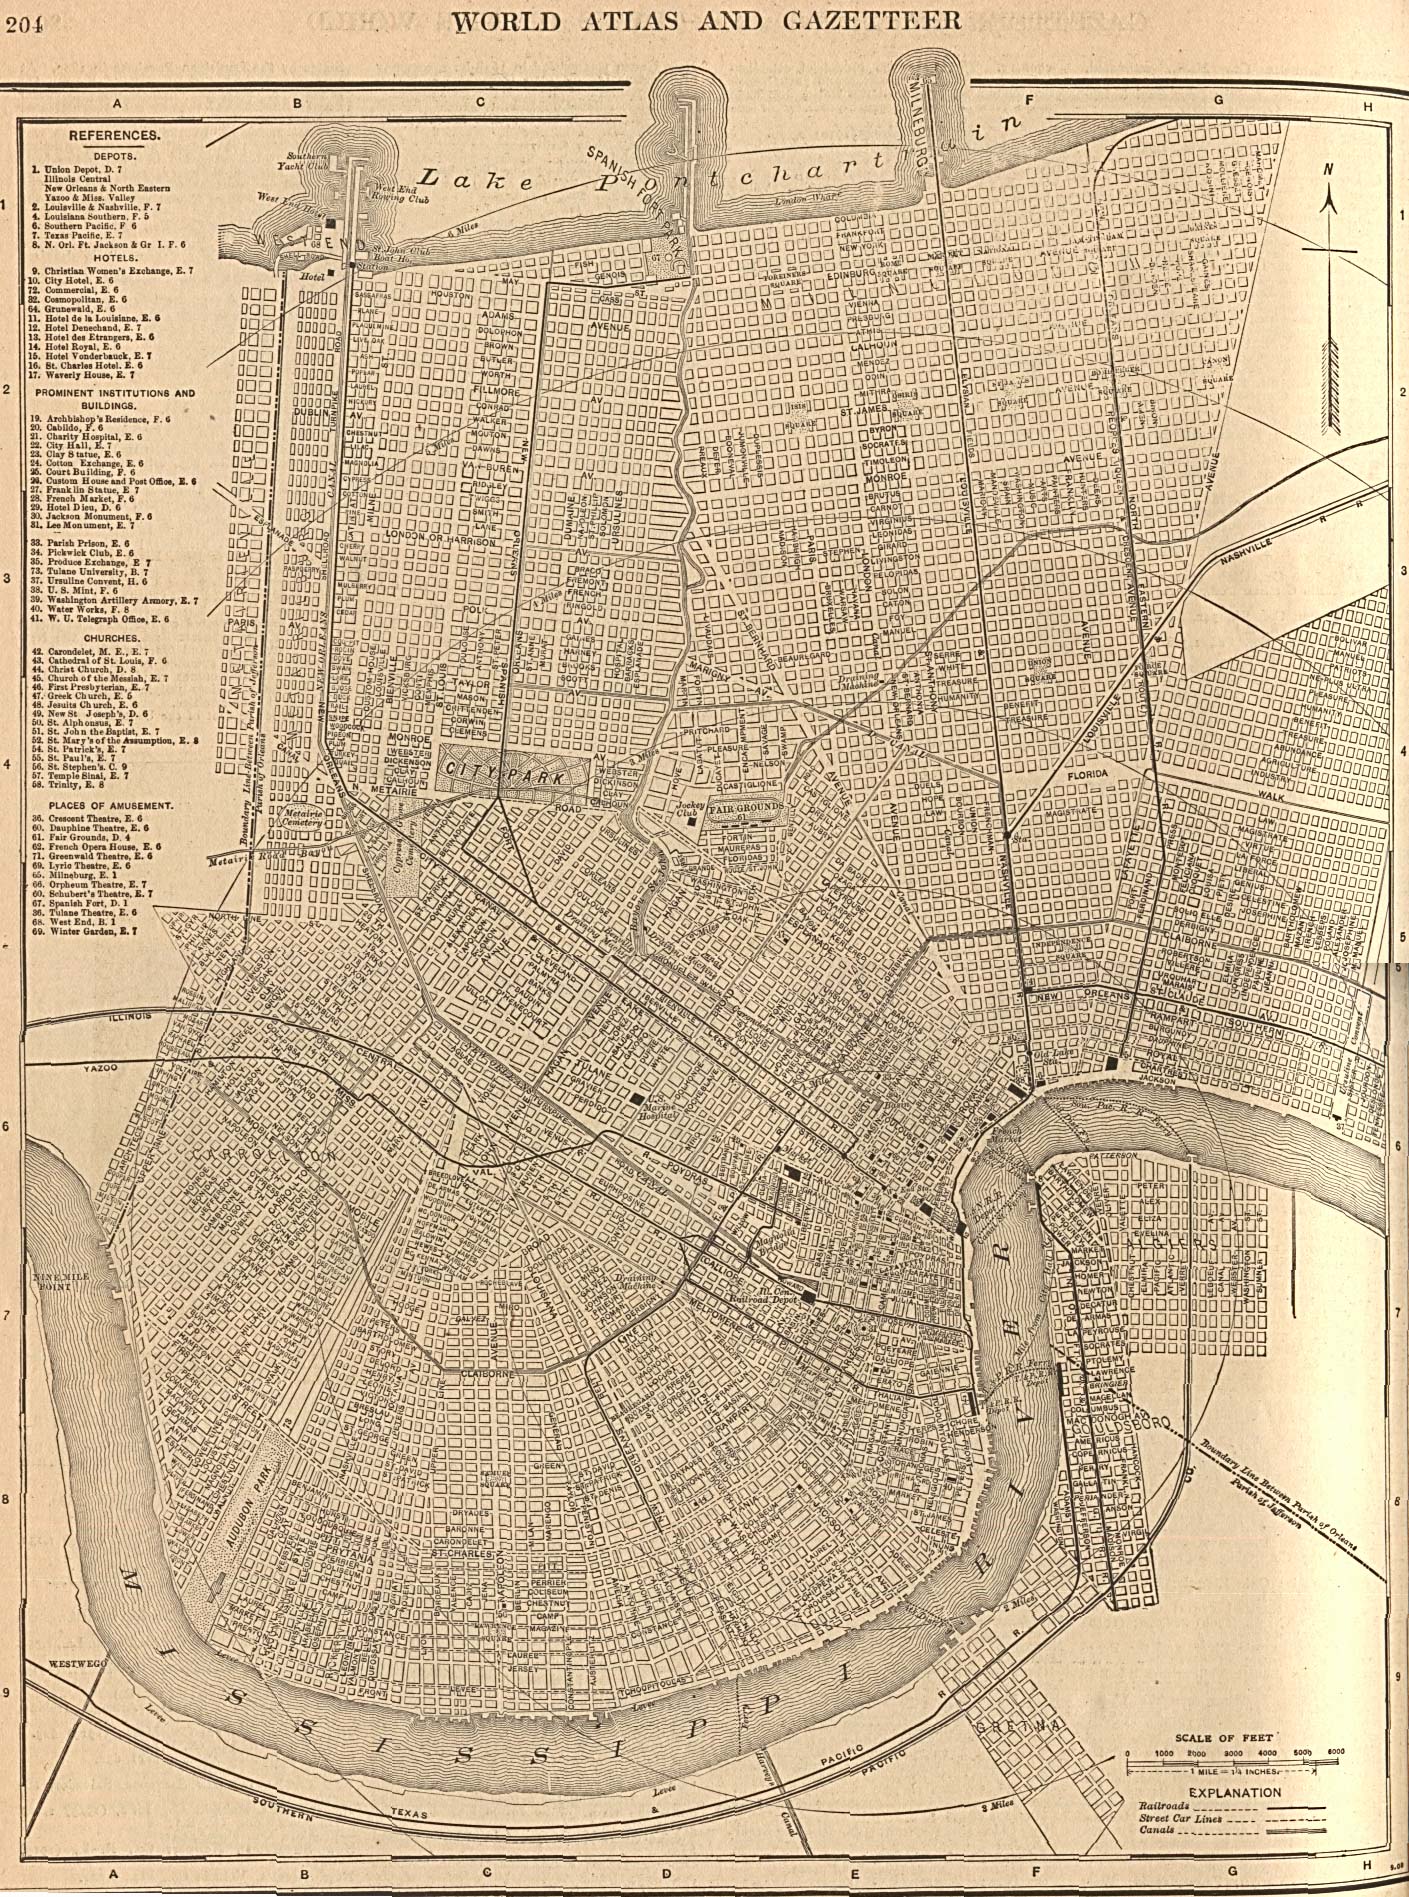 Historical Maps of U.S Cities. New Orleans, Louisiana 1908 The New Encyclopedic Atlas and Gazetteer of the World. New York: P.F. Collier & Son, 1917 (945K) 